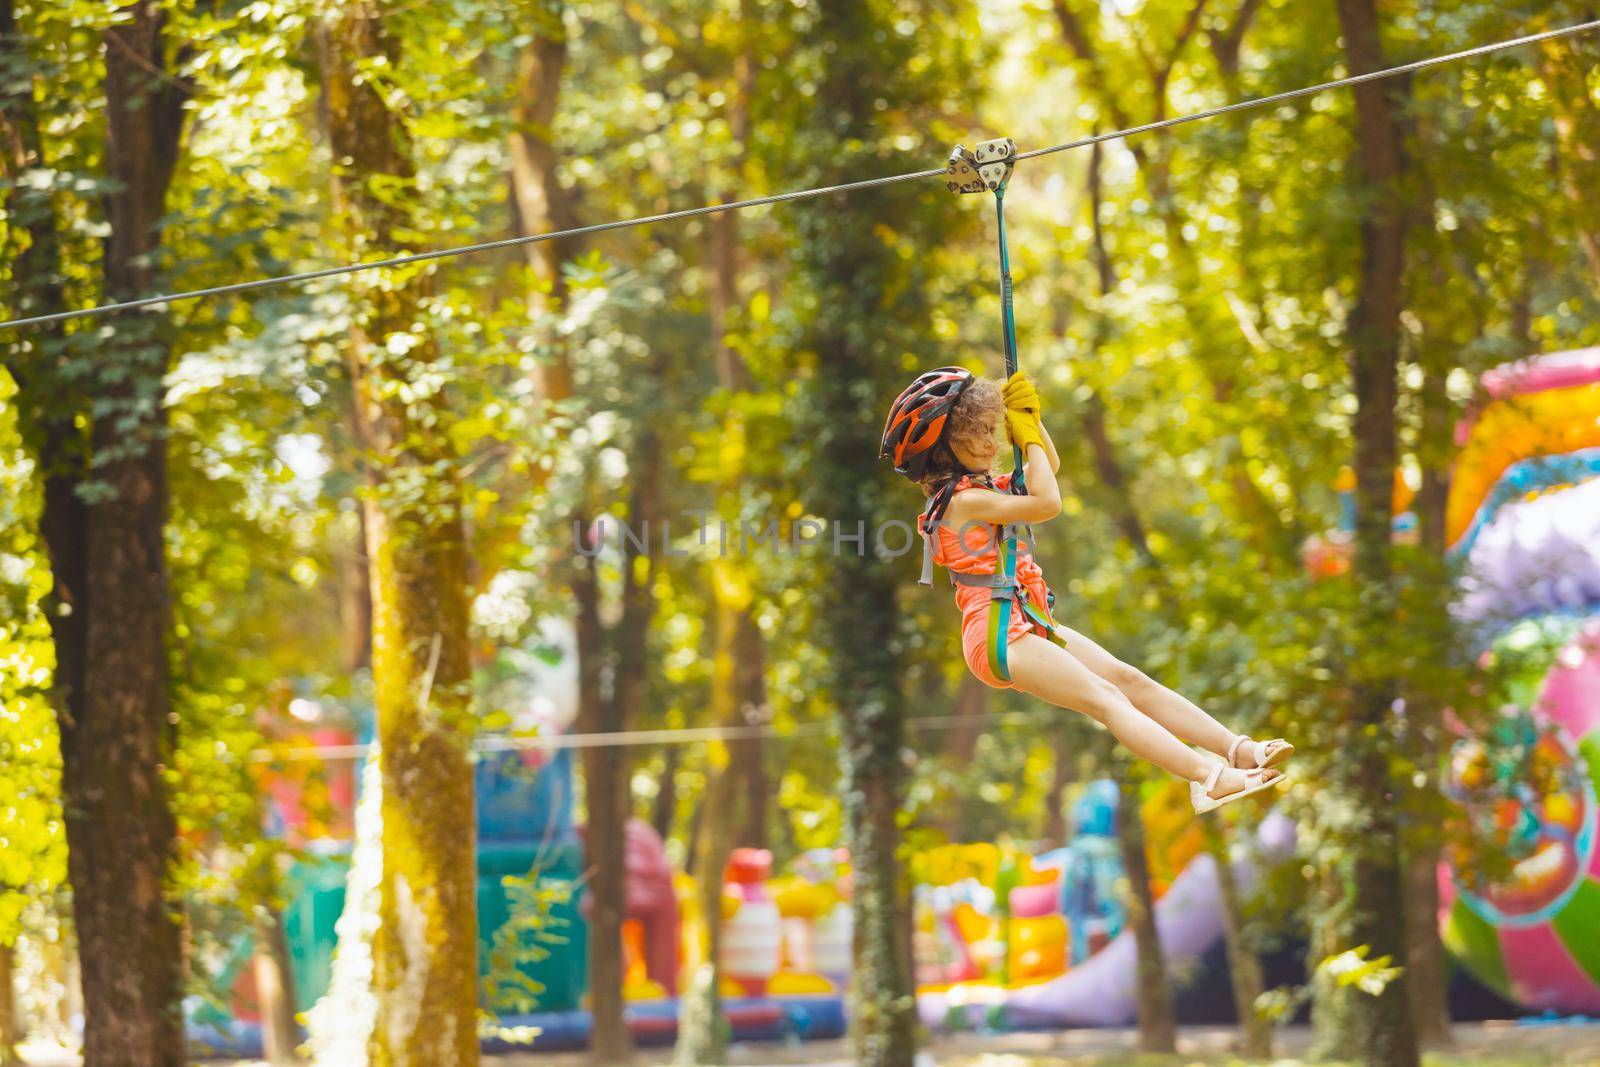 The little girl in a protective helmet goes down the zipline in the rope park